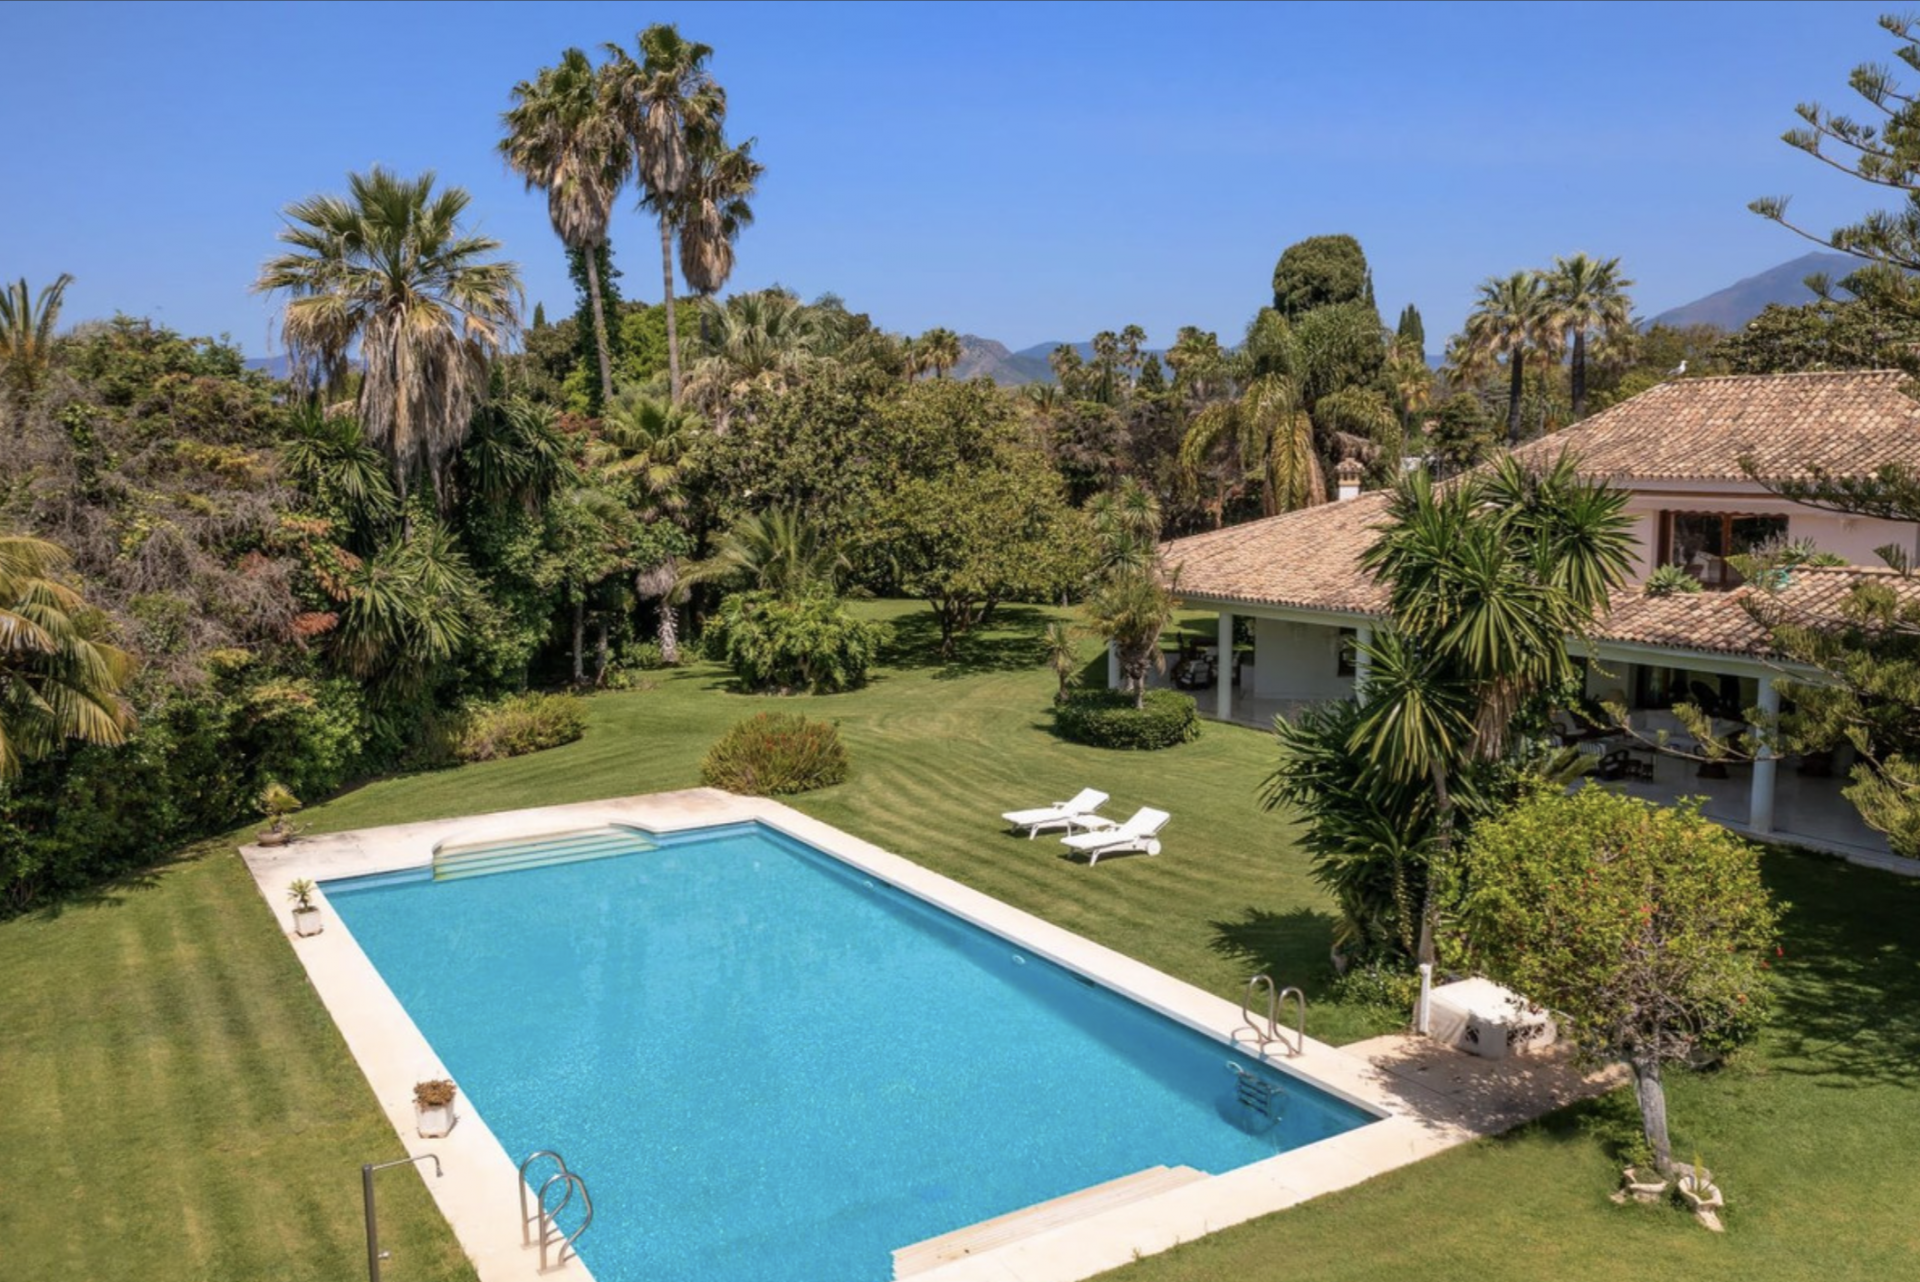 Spectacular villa in Guadalmina Baja designed by a renowned architect and set in a 1,707 m2 plot featuring its own tennis court